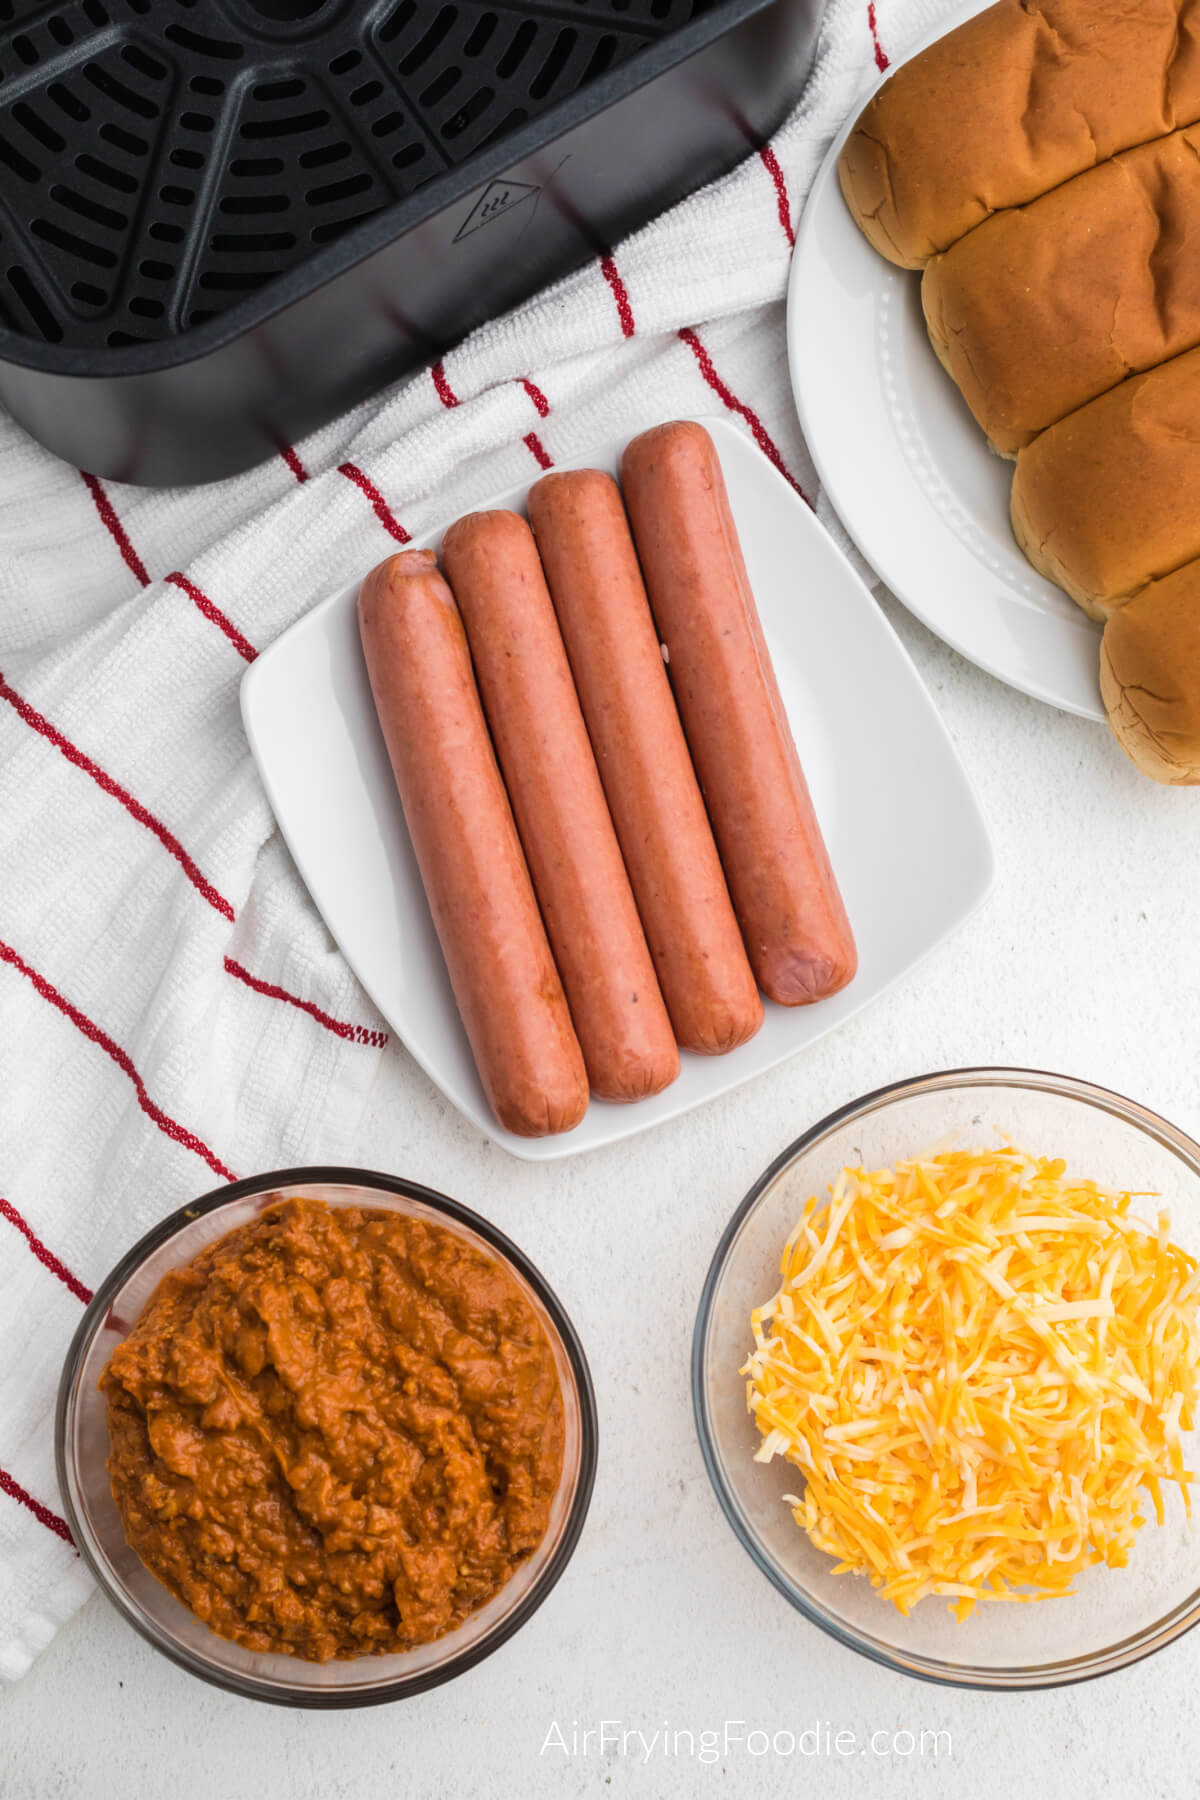 Ingredients needed to make chili cheese dogs in the air fryer on a table. Hotdogs on a plate, buns on a plate, chili in a bowl, and shredded cheese in a bowl. 